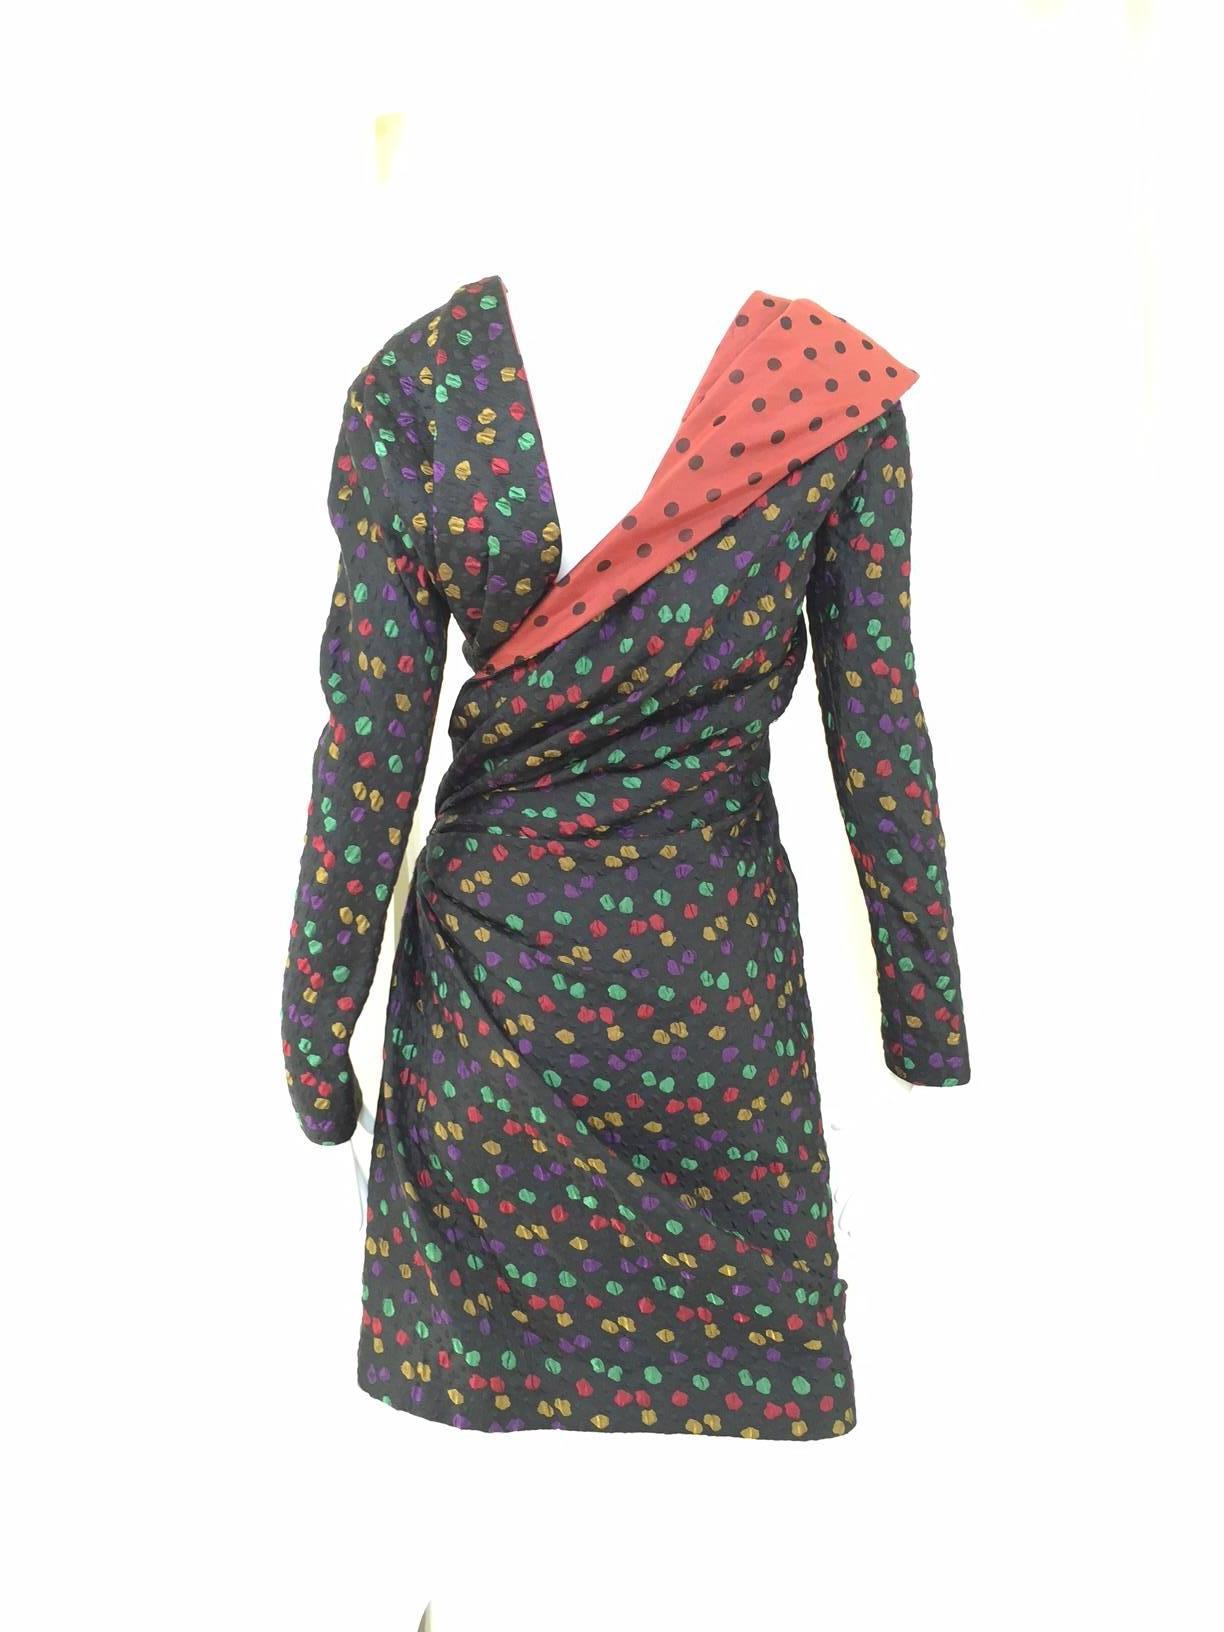 Rare 1980s Givenchy haute couture black silk matelassé cocktail dress with asymmetrical neck line with multi color, irregular shaped dots in yellow, red, purple and green.  On the front of the dress there is diagonal ruching across the bodice to the